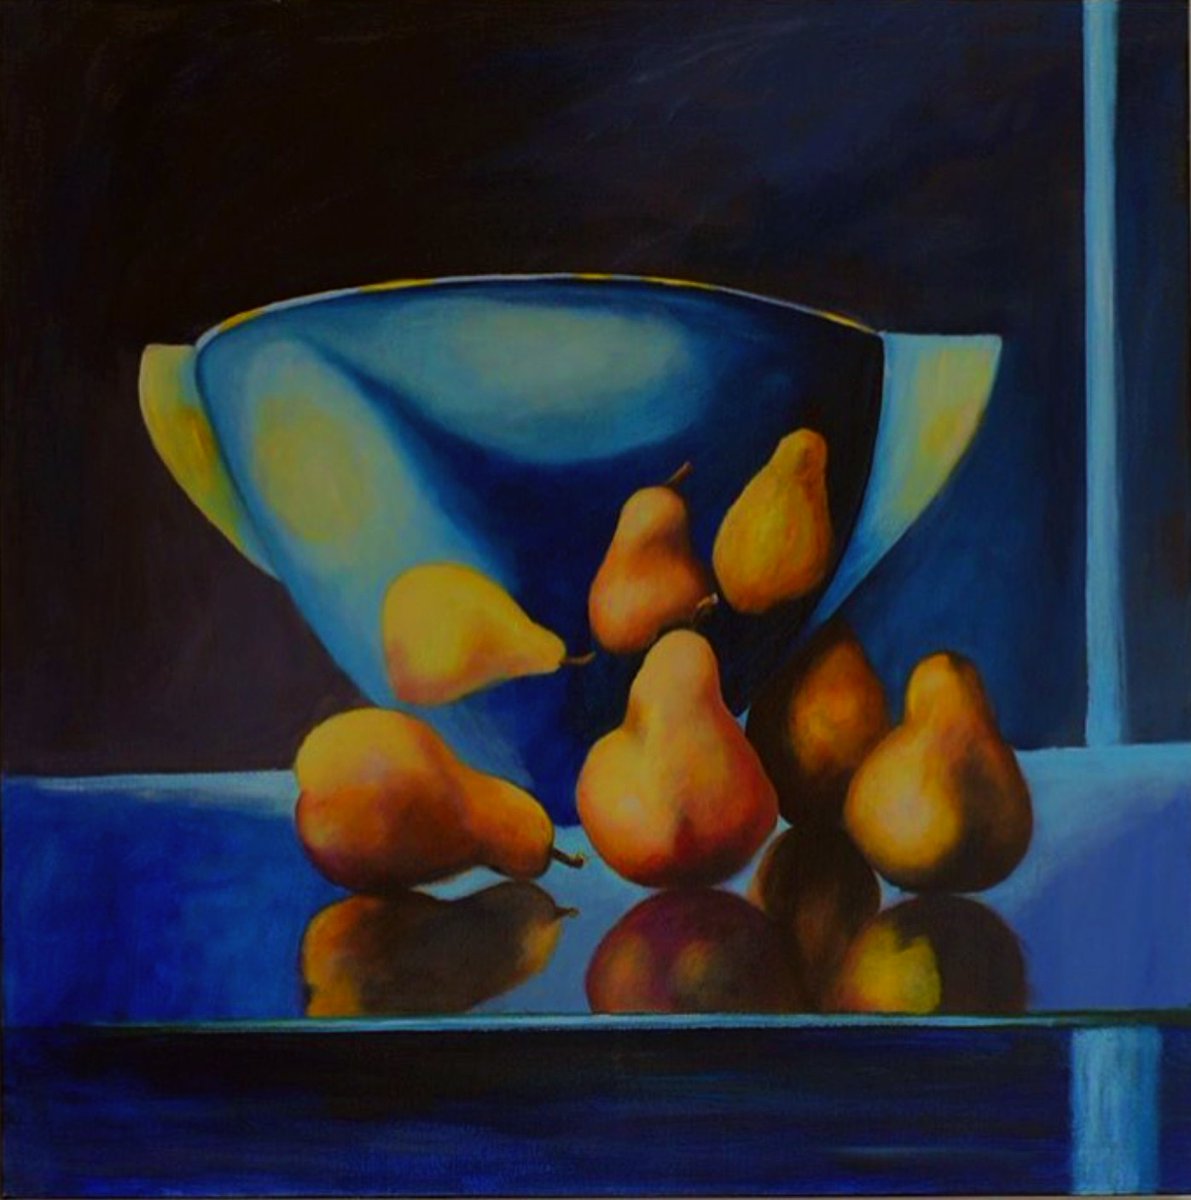 Pears, Edition of 50 at 1 tez hicetnunc.art/objkt/648789